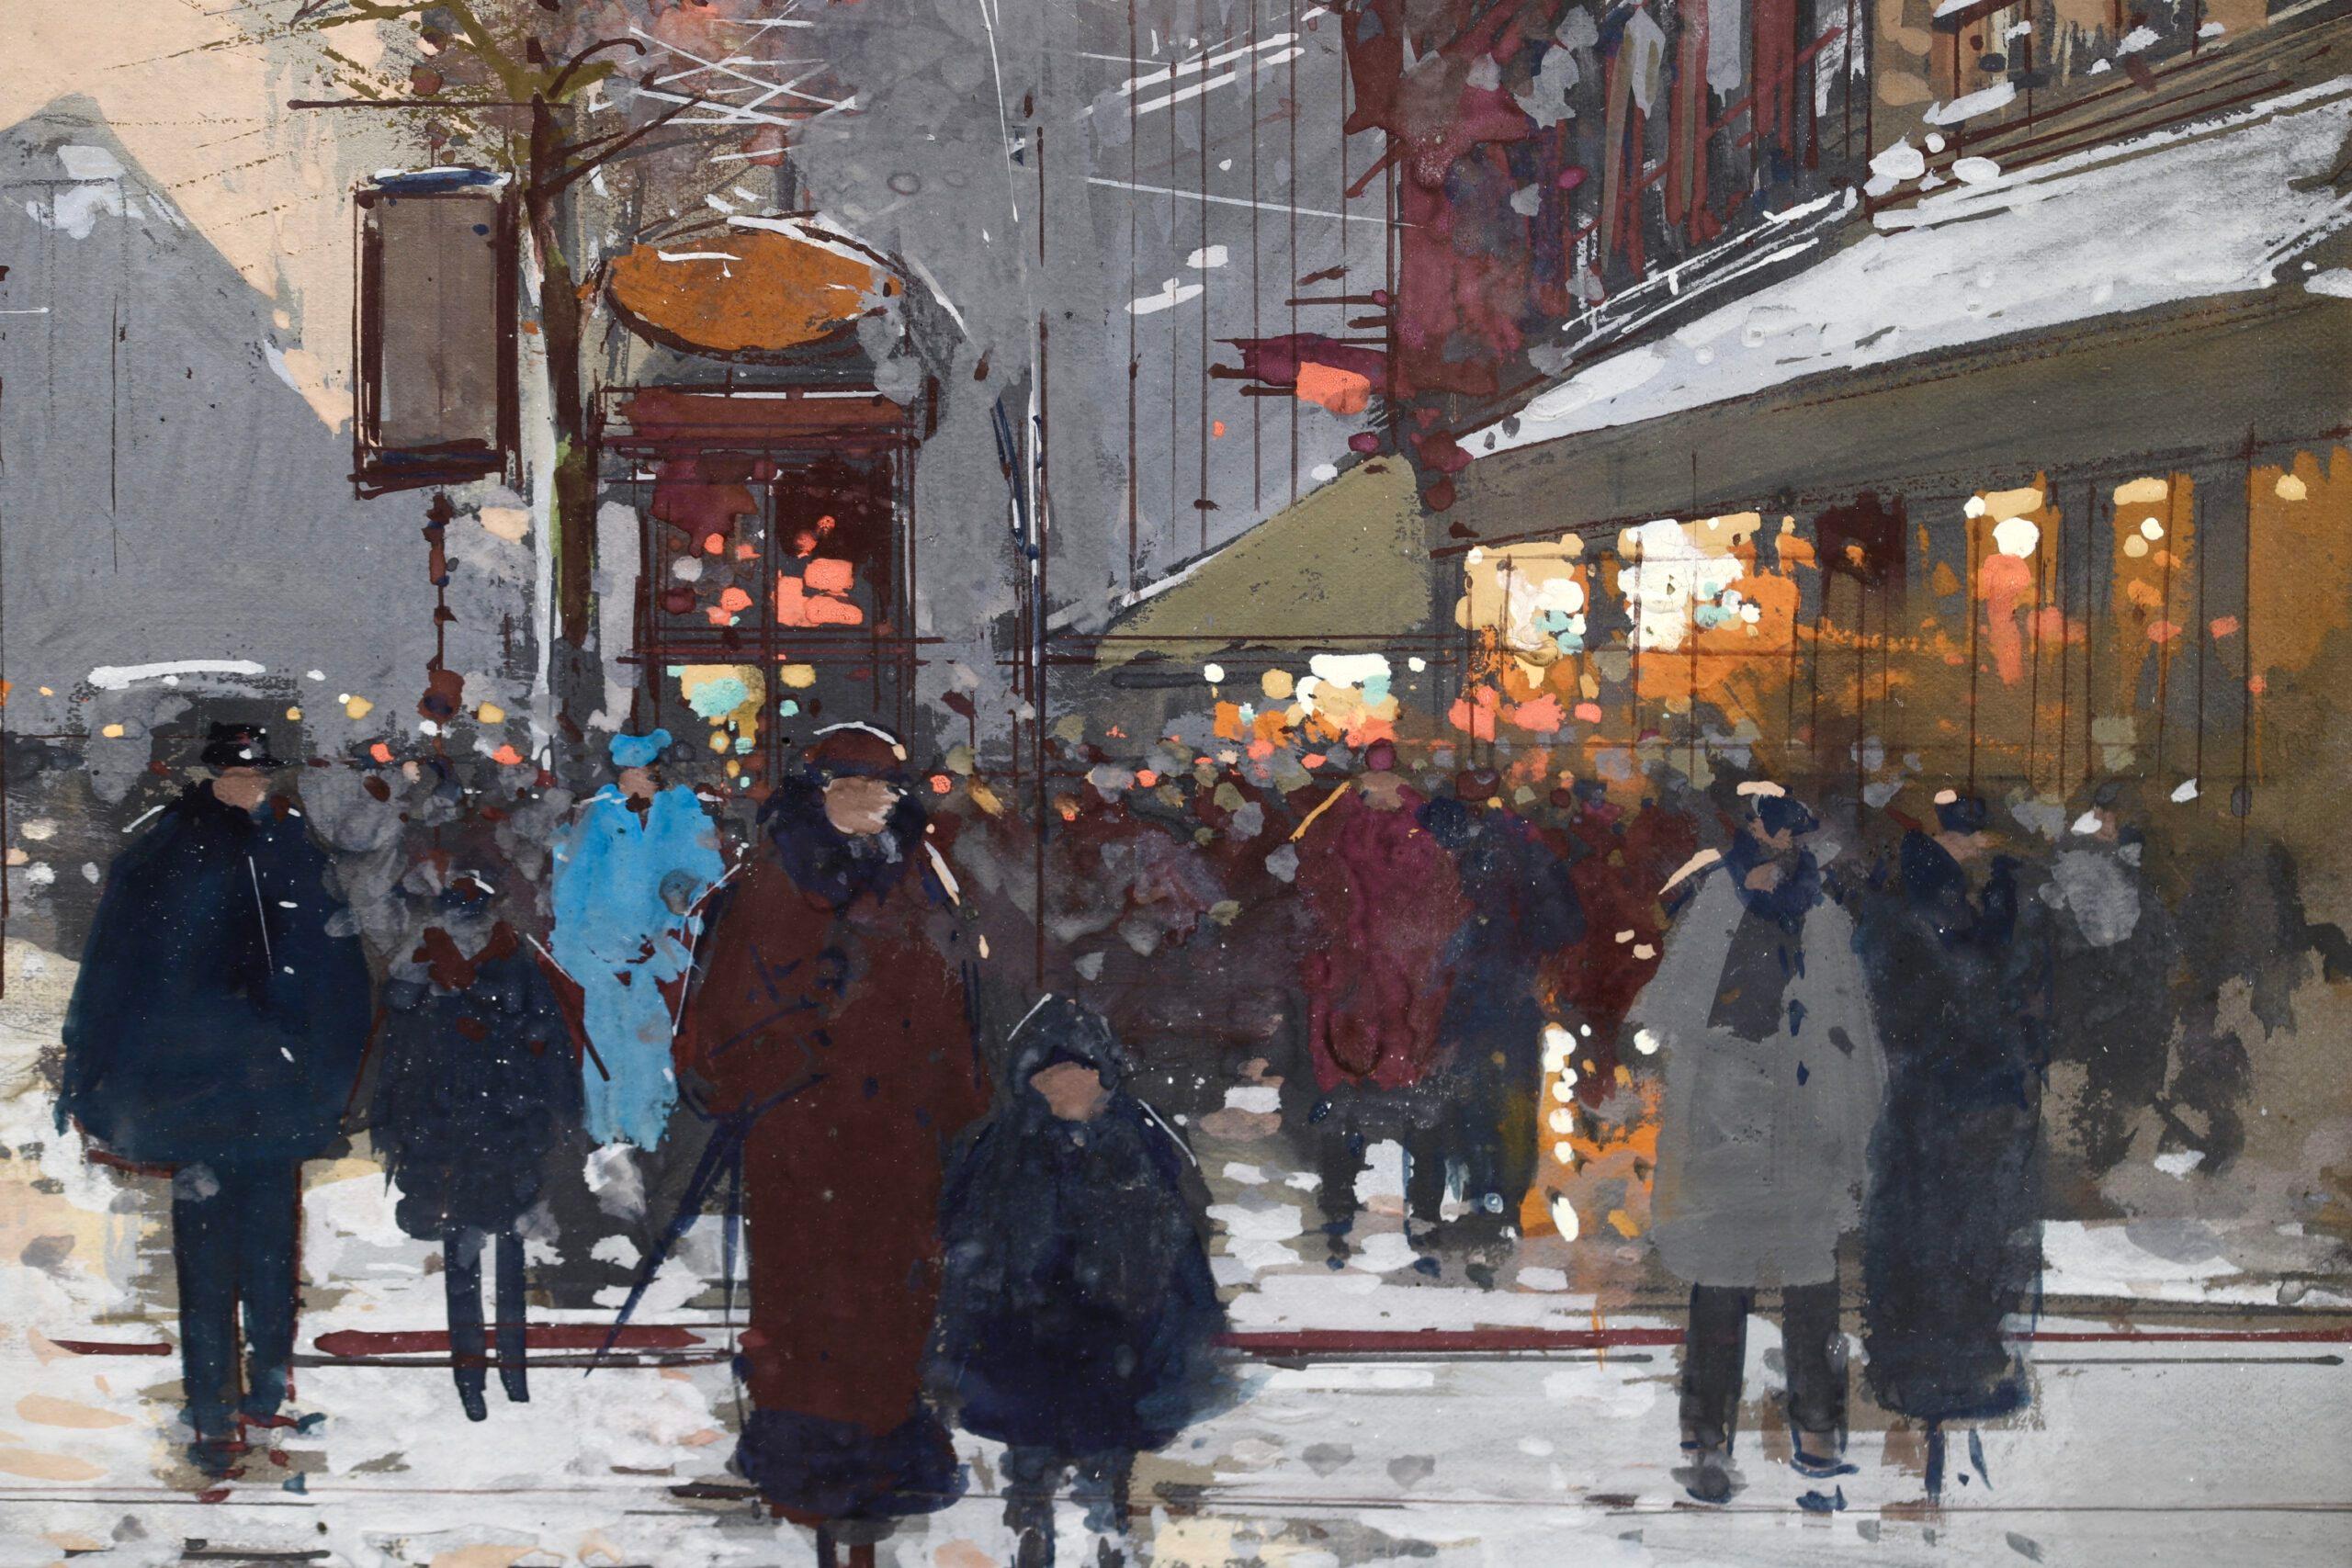 Winter - Porte St Denis - Impressionist Cityscape Painting by Edouard Cortes 9